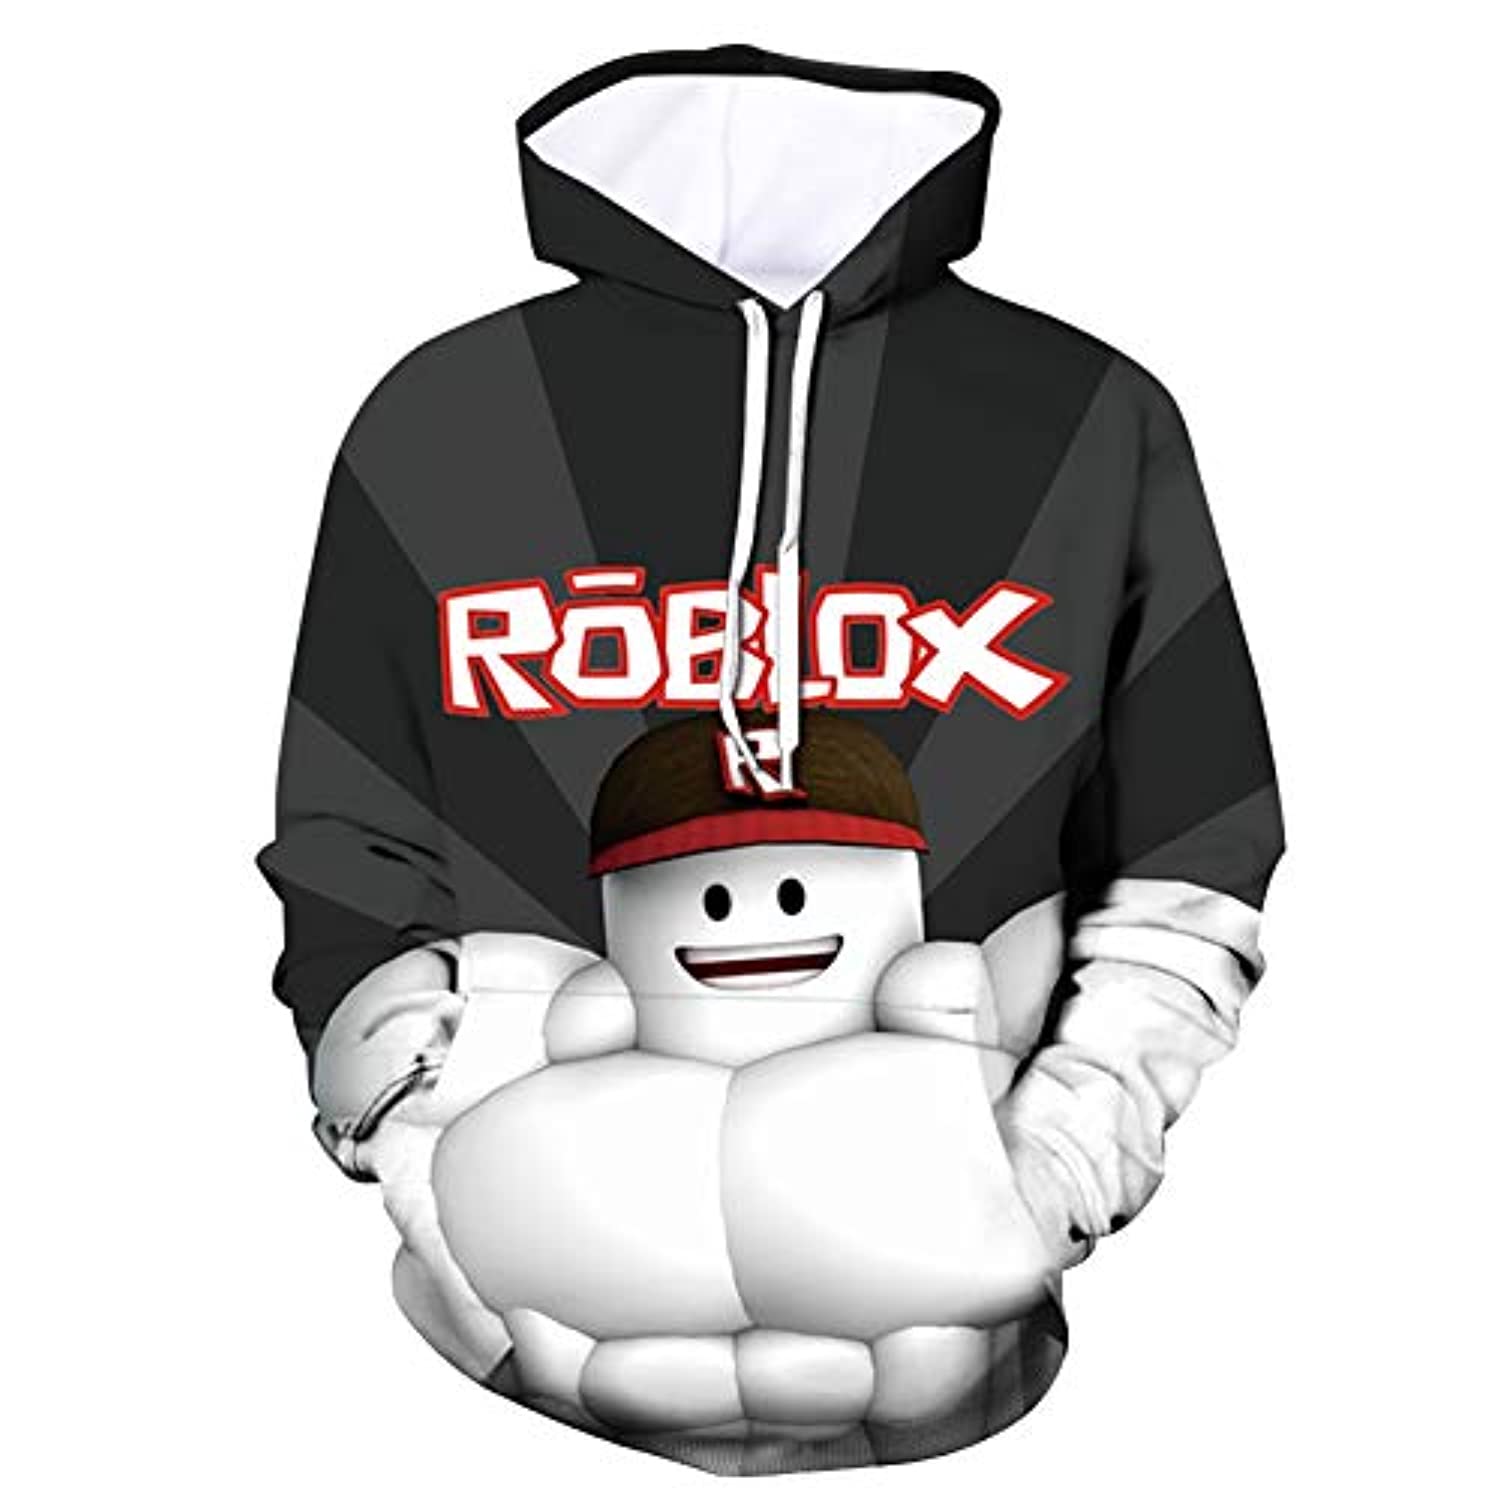 Roblox Hoodie – 3D Print Hooded Pullover for Teens